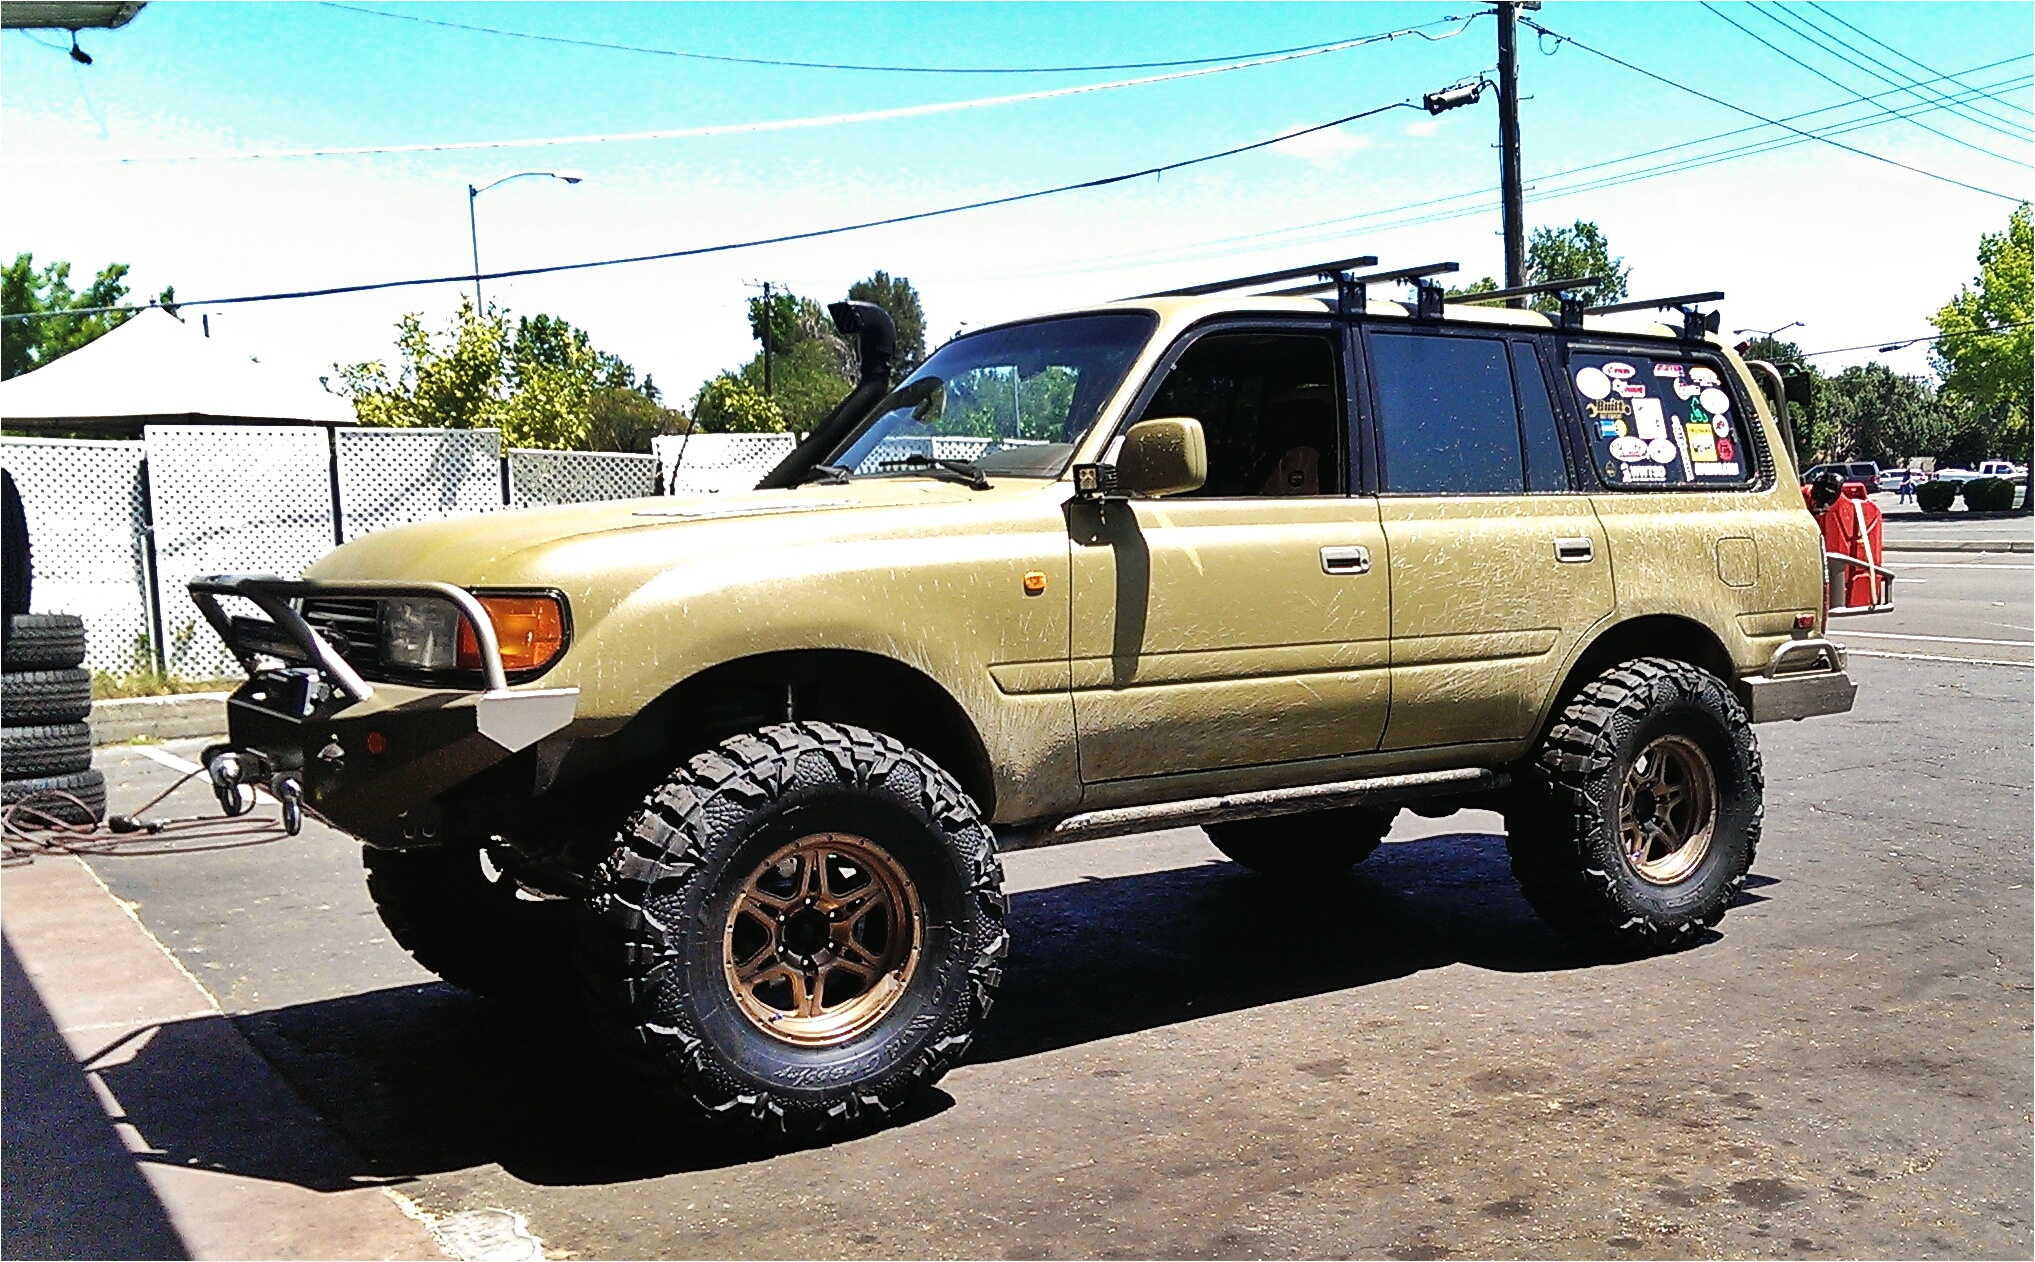 first off the rack is going on this thing a 1996 toyota land cruiser